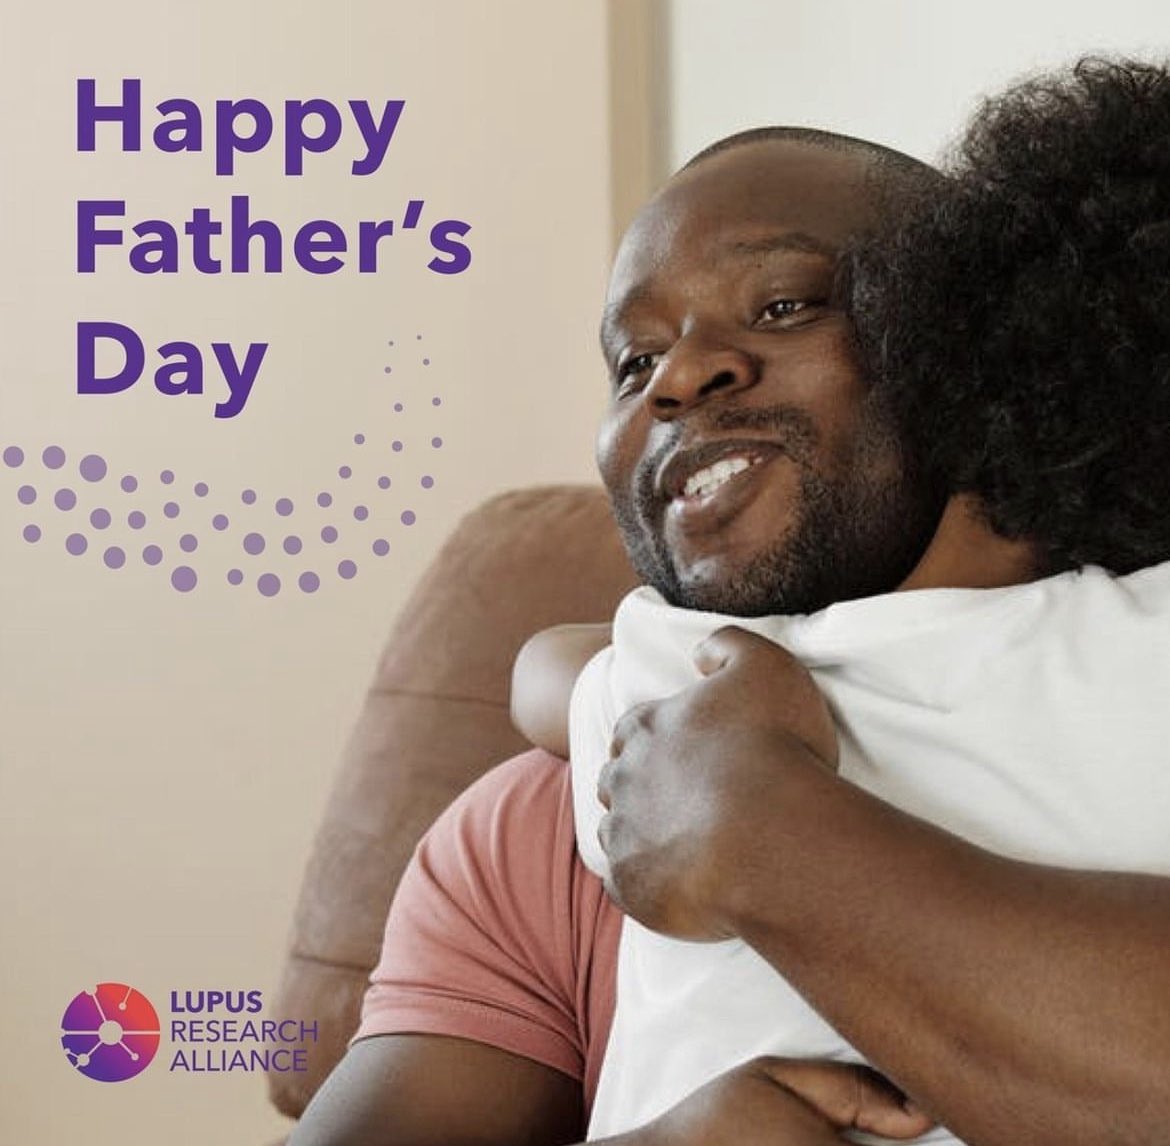 The LRA wishes all special dads a happy and healthy Father’s Day! 👨👔🙌 #dad #fathersday #family